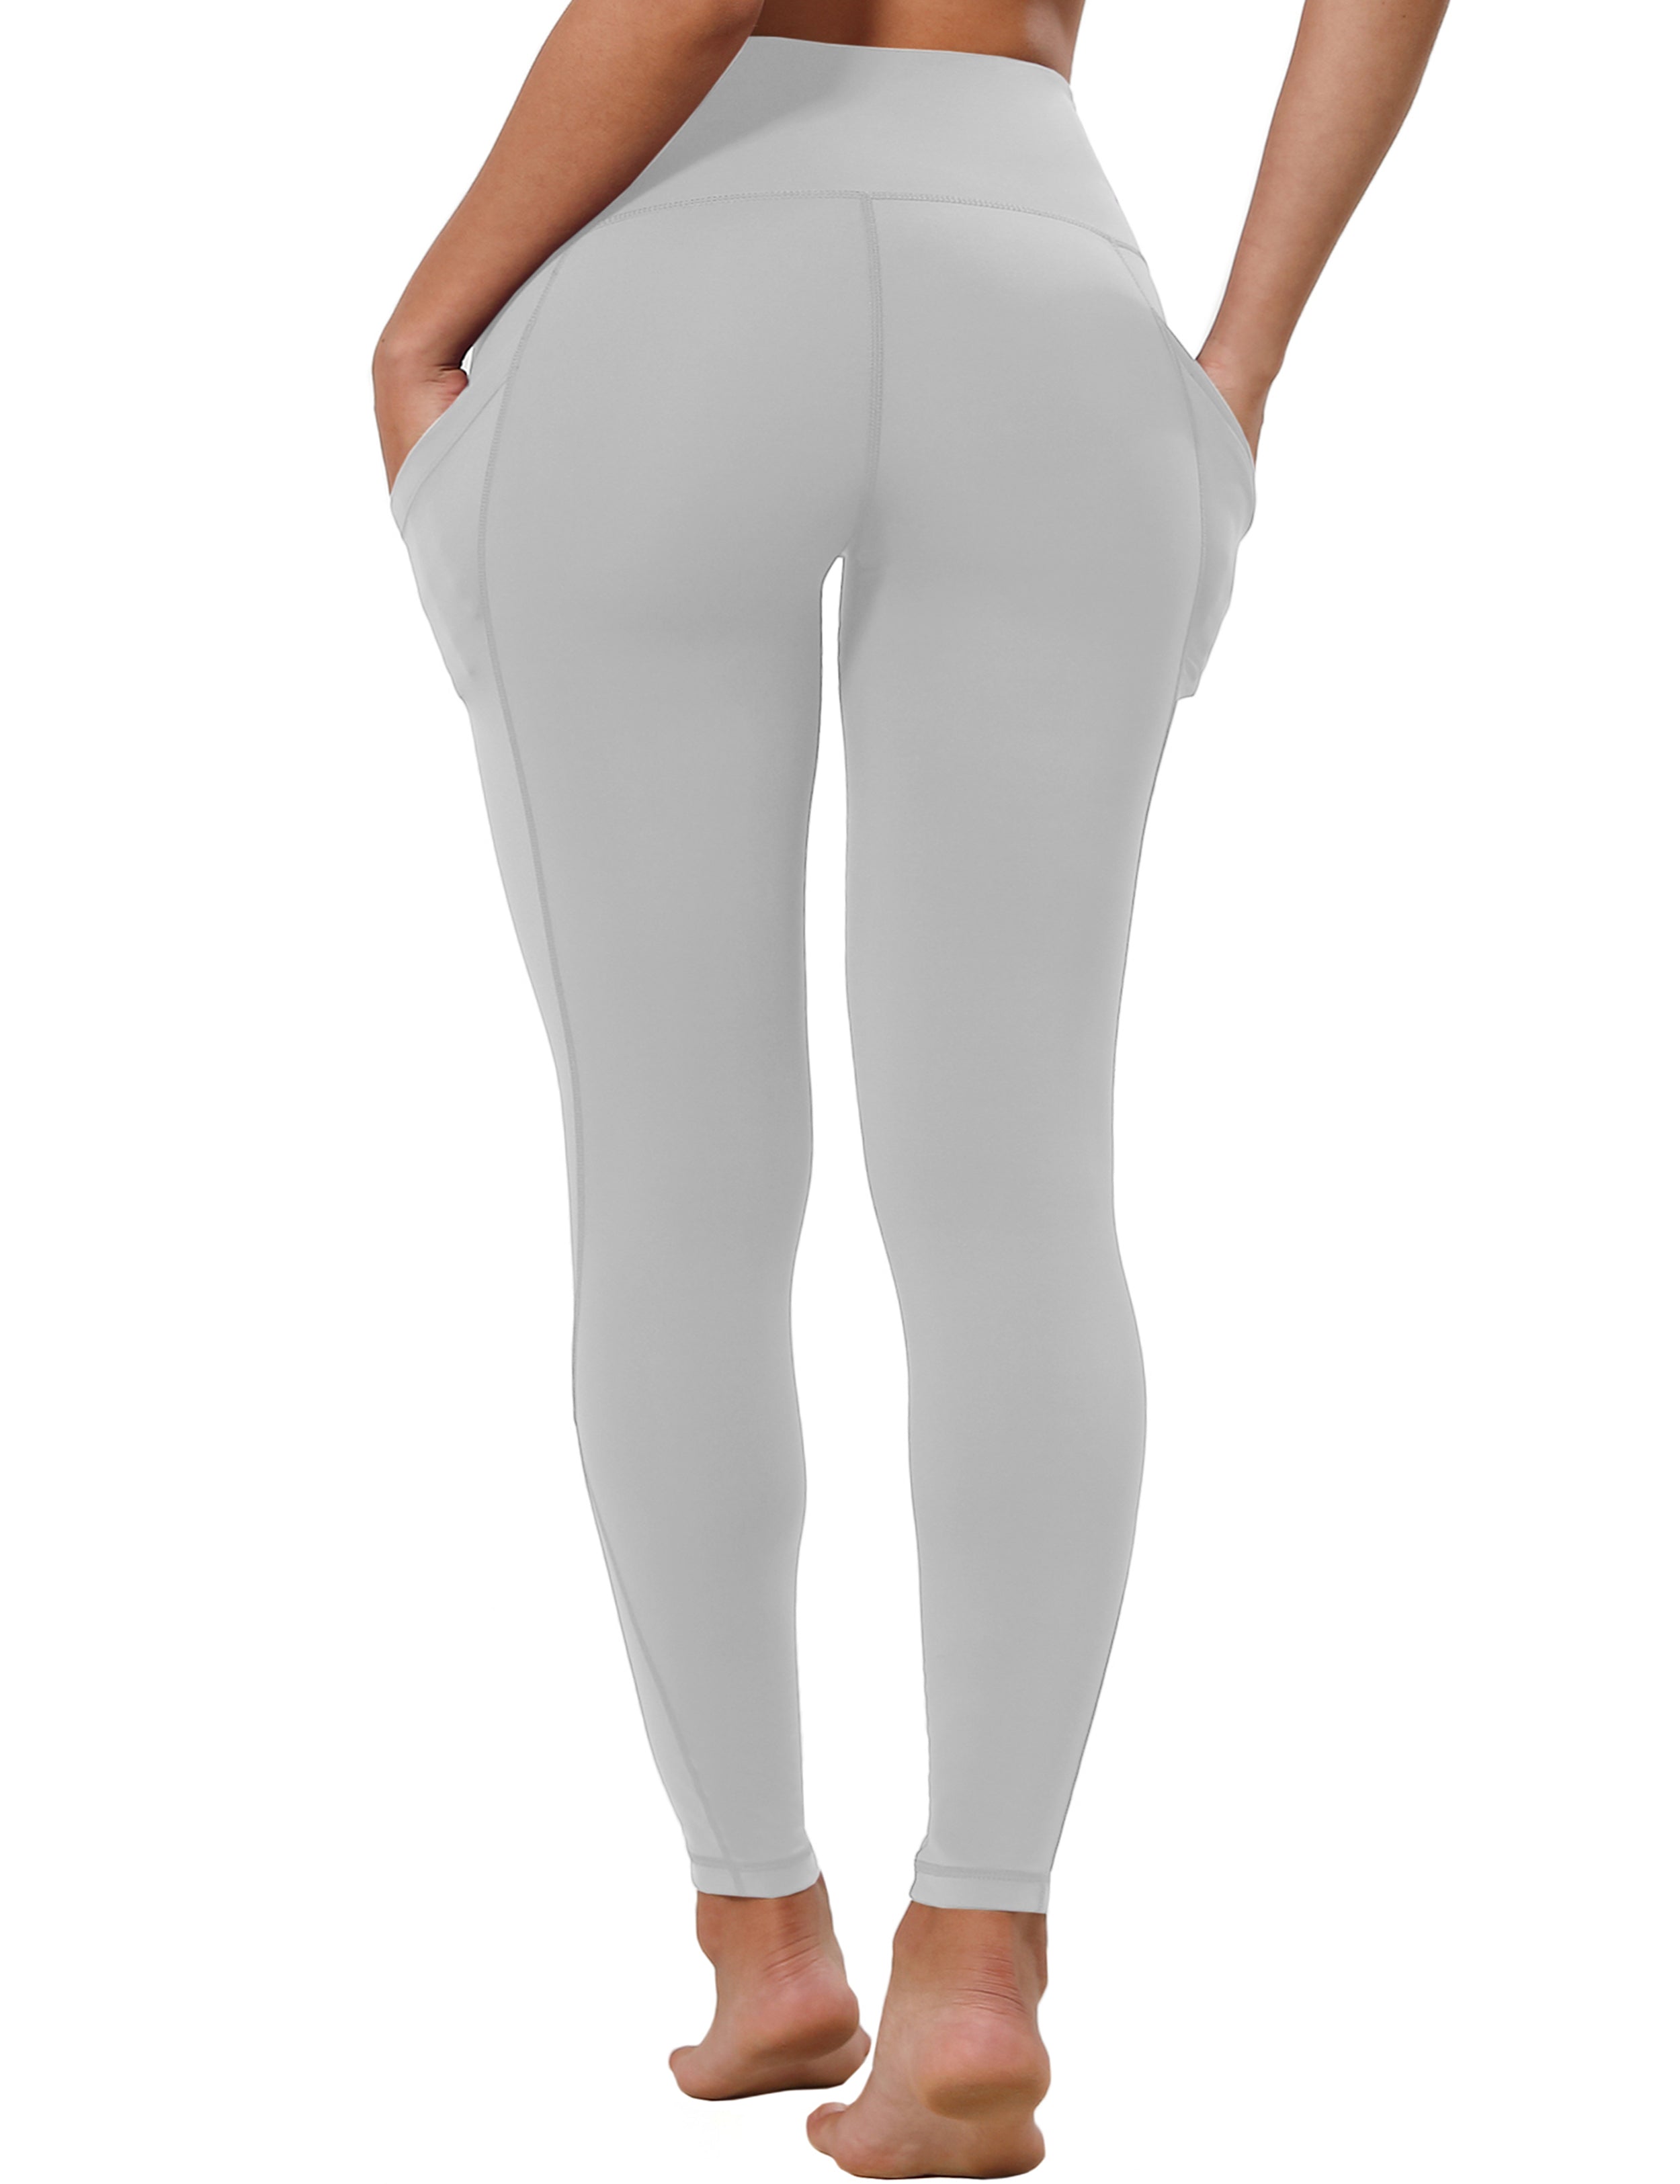 High Waist Side Pockets Jogging Pants lightgray 75% Nylon, 25% Spandex Fabric doesn't attract lint easily 4-way stretch No see-through Moisture-wicking Tummy control Inner pocket